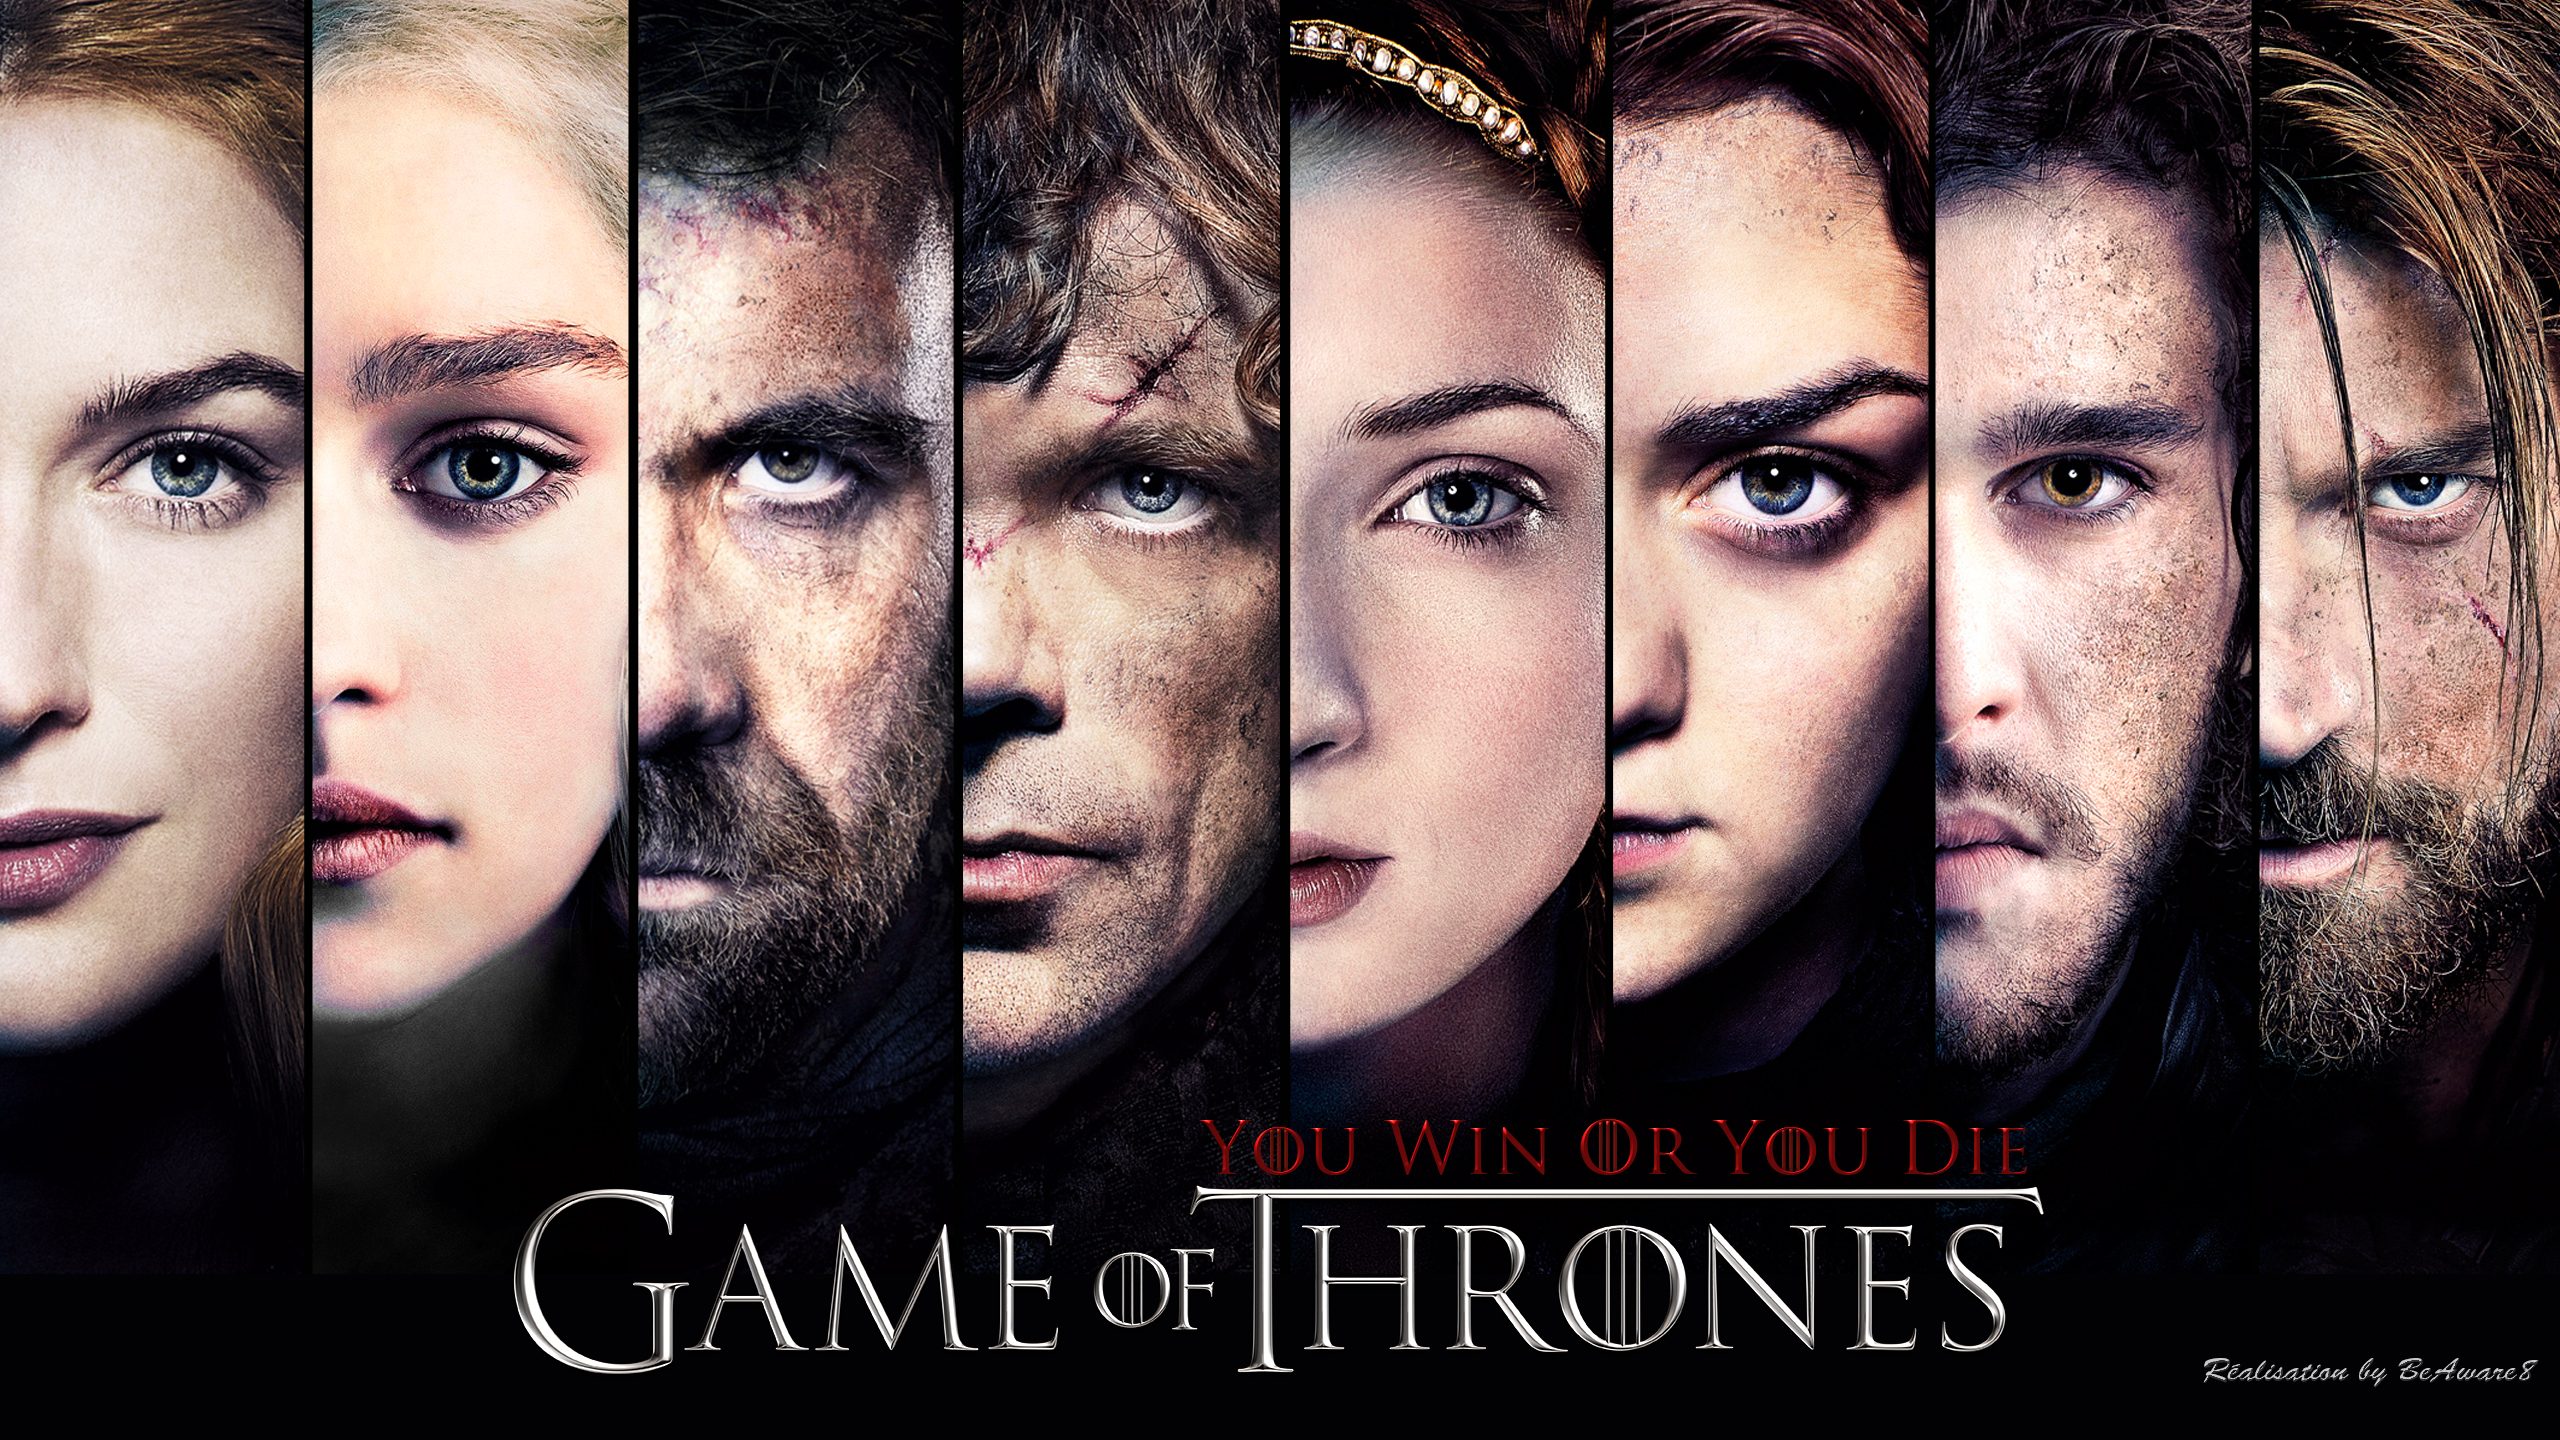 Game of Thrones   Wallpaper High Definition High Quality Widescreen 2560x1440